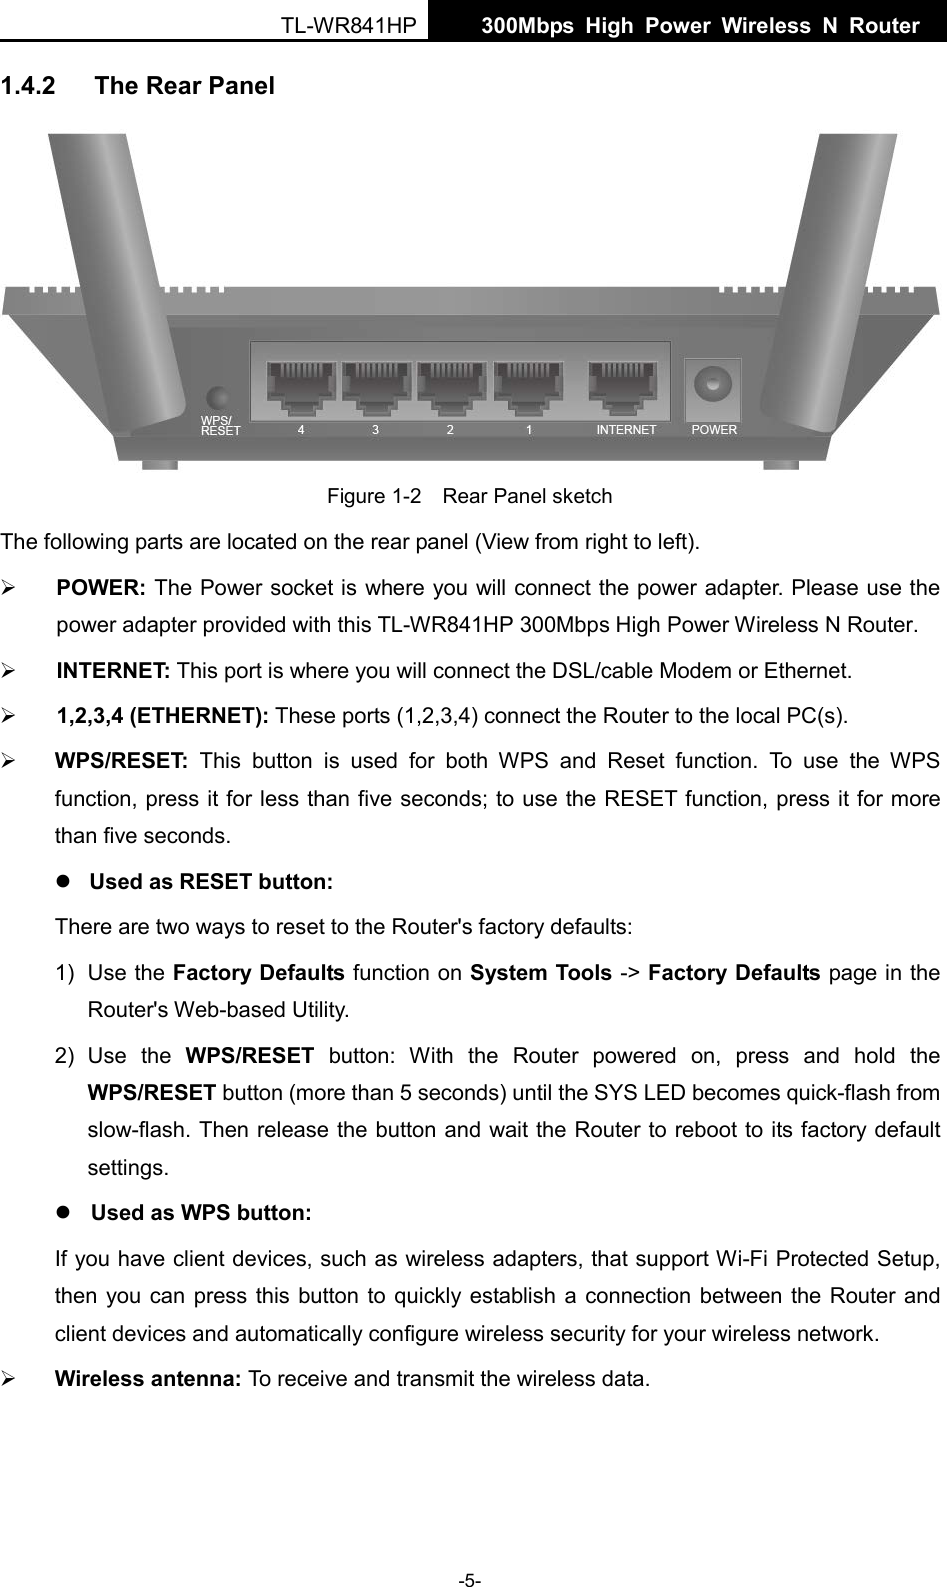  TL-WR841HP  300Mbps High Power Wireless N Router    -5- 1.4.2 The Rear Panel  Figure 1-2    Rear Panel sketch The following parts are located on the rear panel (View from right to left).  POWER: The Power socket is where you will connect the power adapter. Please use the power adapter provided with this TL-WR841HP 300Mbps High Power Wireless N Router.  INTERNET: This port is where you will connect the DSL/cable Modem or Ethernet.  1,2,3,4 (ETHERNET): These ports (1,2,3,4) connect the Router to the local PC(s).  WPS/RESET: This button is used for both WPS and Reset function. To use the WPS function, press it for less than five seconds; to use the RESET function, press it for more than five seconds.    Used as RESET button: There are two ways to reset to the Router&apos;s factory defaults: 1) Use the Factory Defaults function on System Tools -&gt; Factory Defaults page in the Router&apos;s Web-based Utility. 2) Use the WPS/RESET button:  With the  Router powered on, press and hold the WPS/RESET button (more than 5 seconds) until the SYS LED becomes quick-flash from slow-flash. Then release the button and wait the Router to reboot to its factory default settings.  Used as WPS button: If you have client devices, such as wireless adapters, that support Wi-Fi Protected Setup, then you can press this button to quickly establish a connection between the Router and client devices and automatically configure wireless security for your wireless network.  Wireless antenna: To receive and transmit the wireless data. 